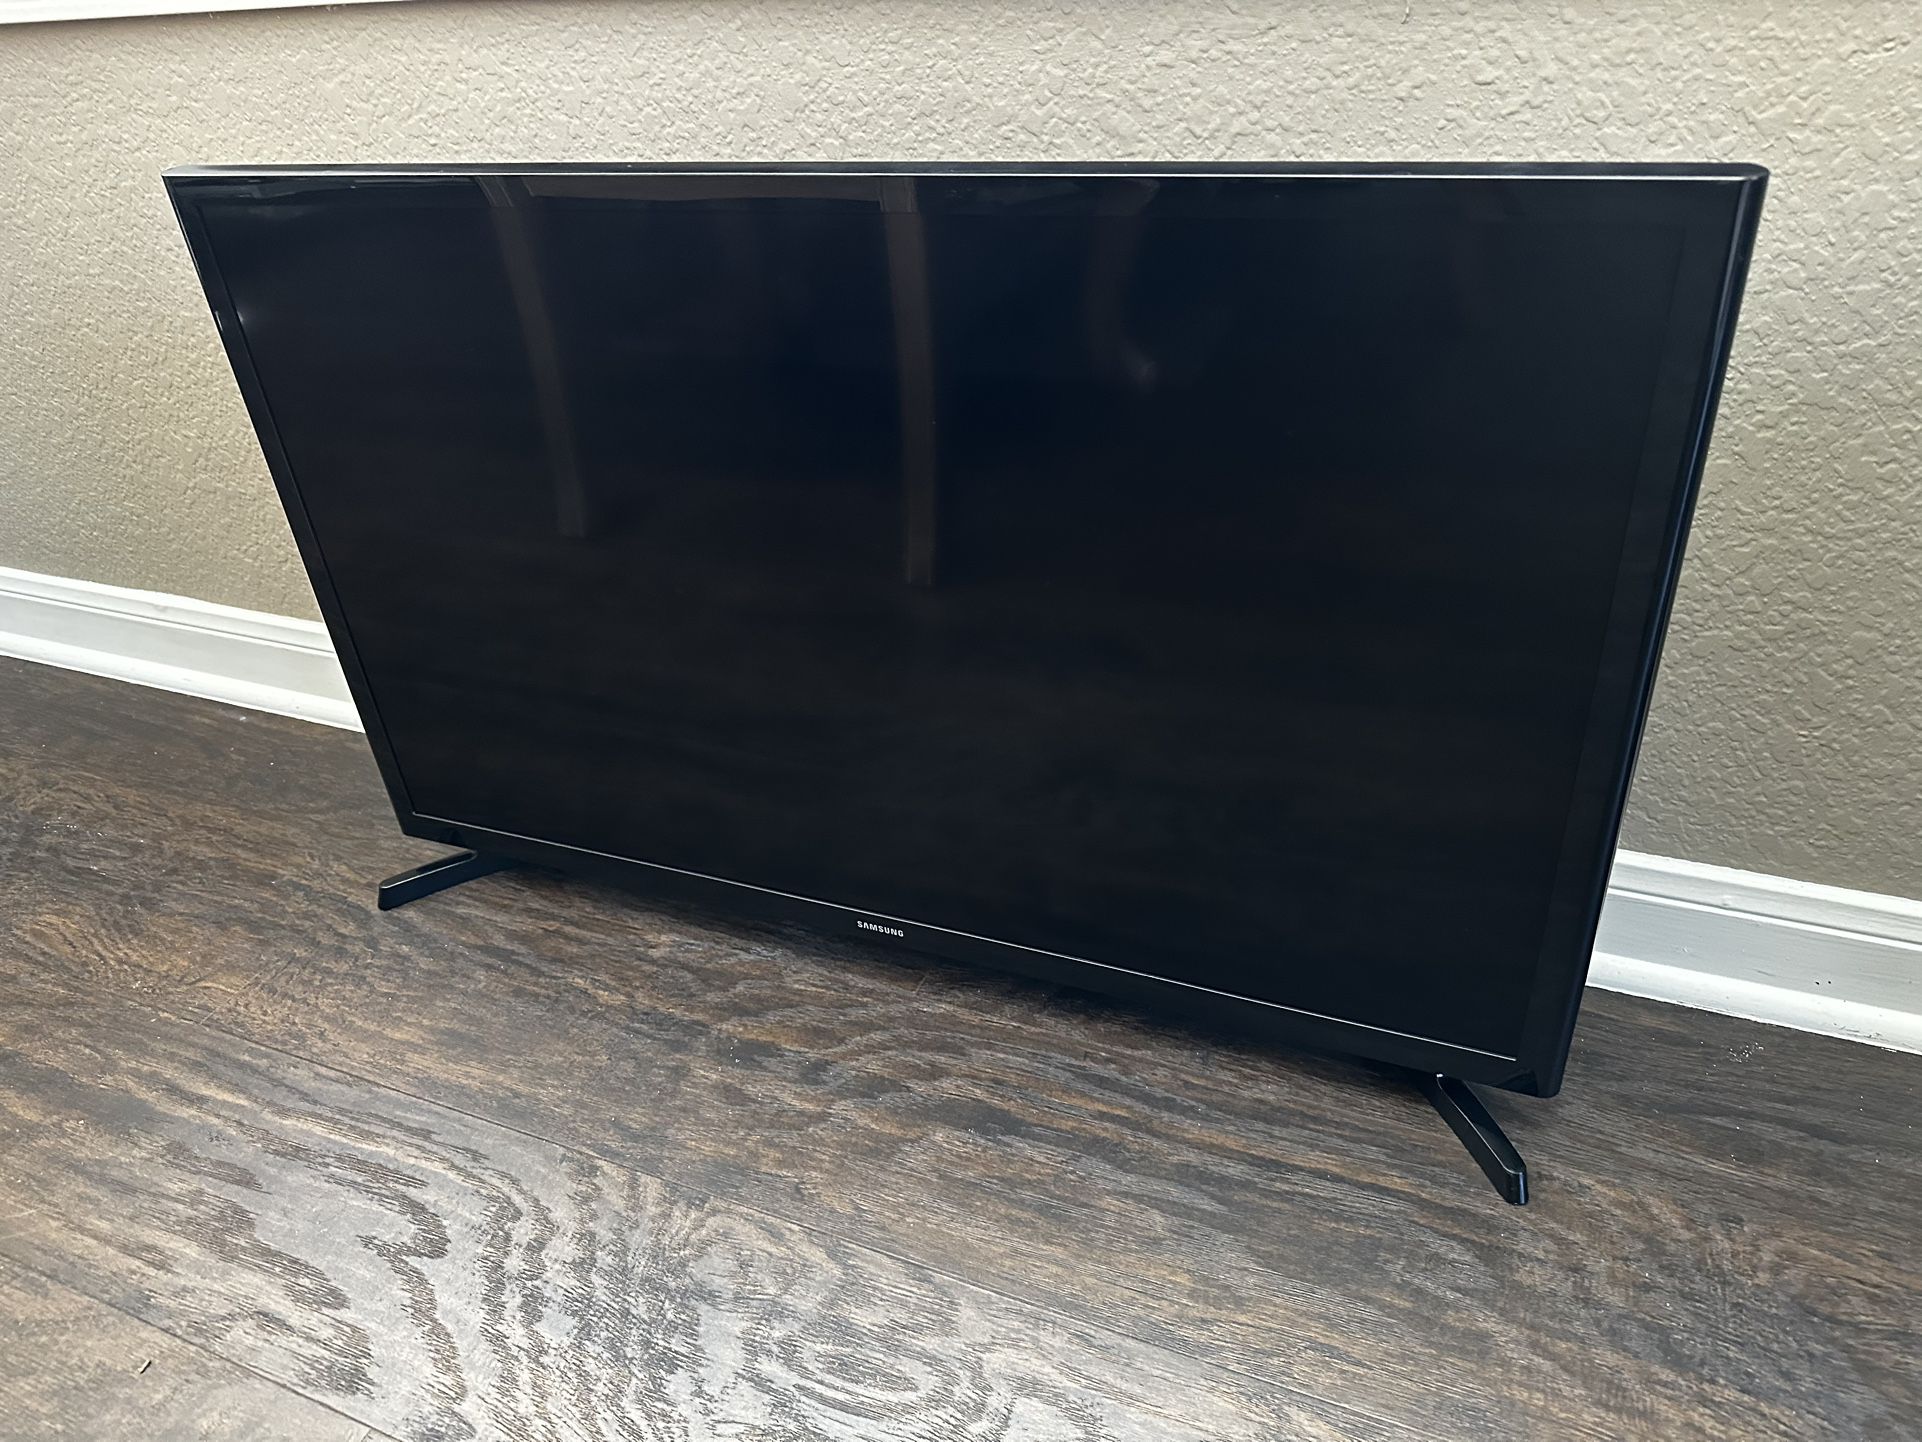 Samsung 32" HD Flat TV H4000 Series 4 With remote